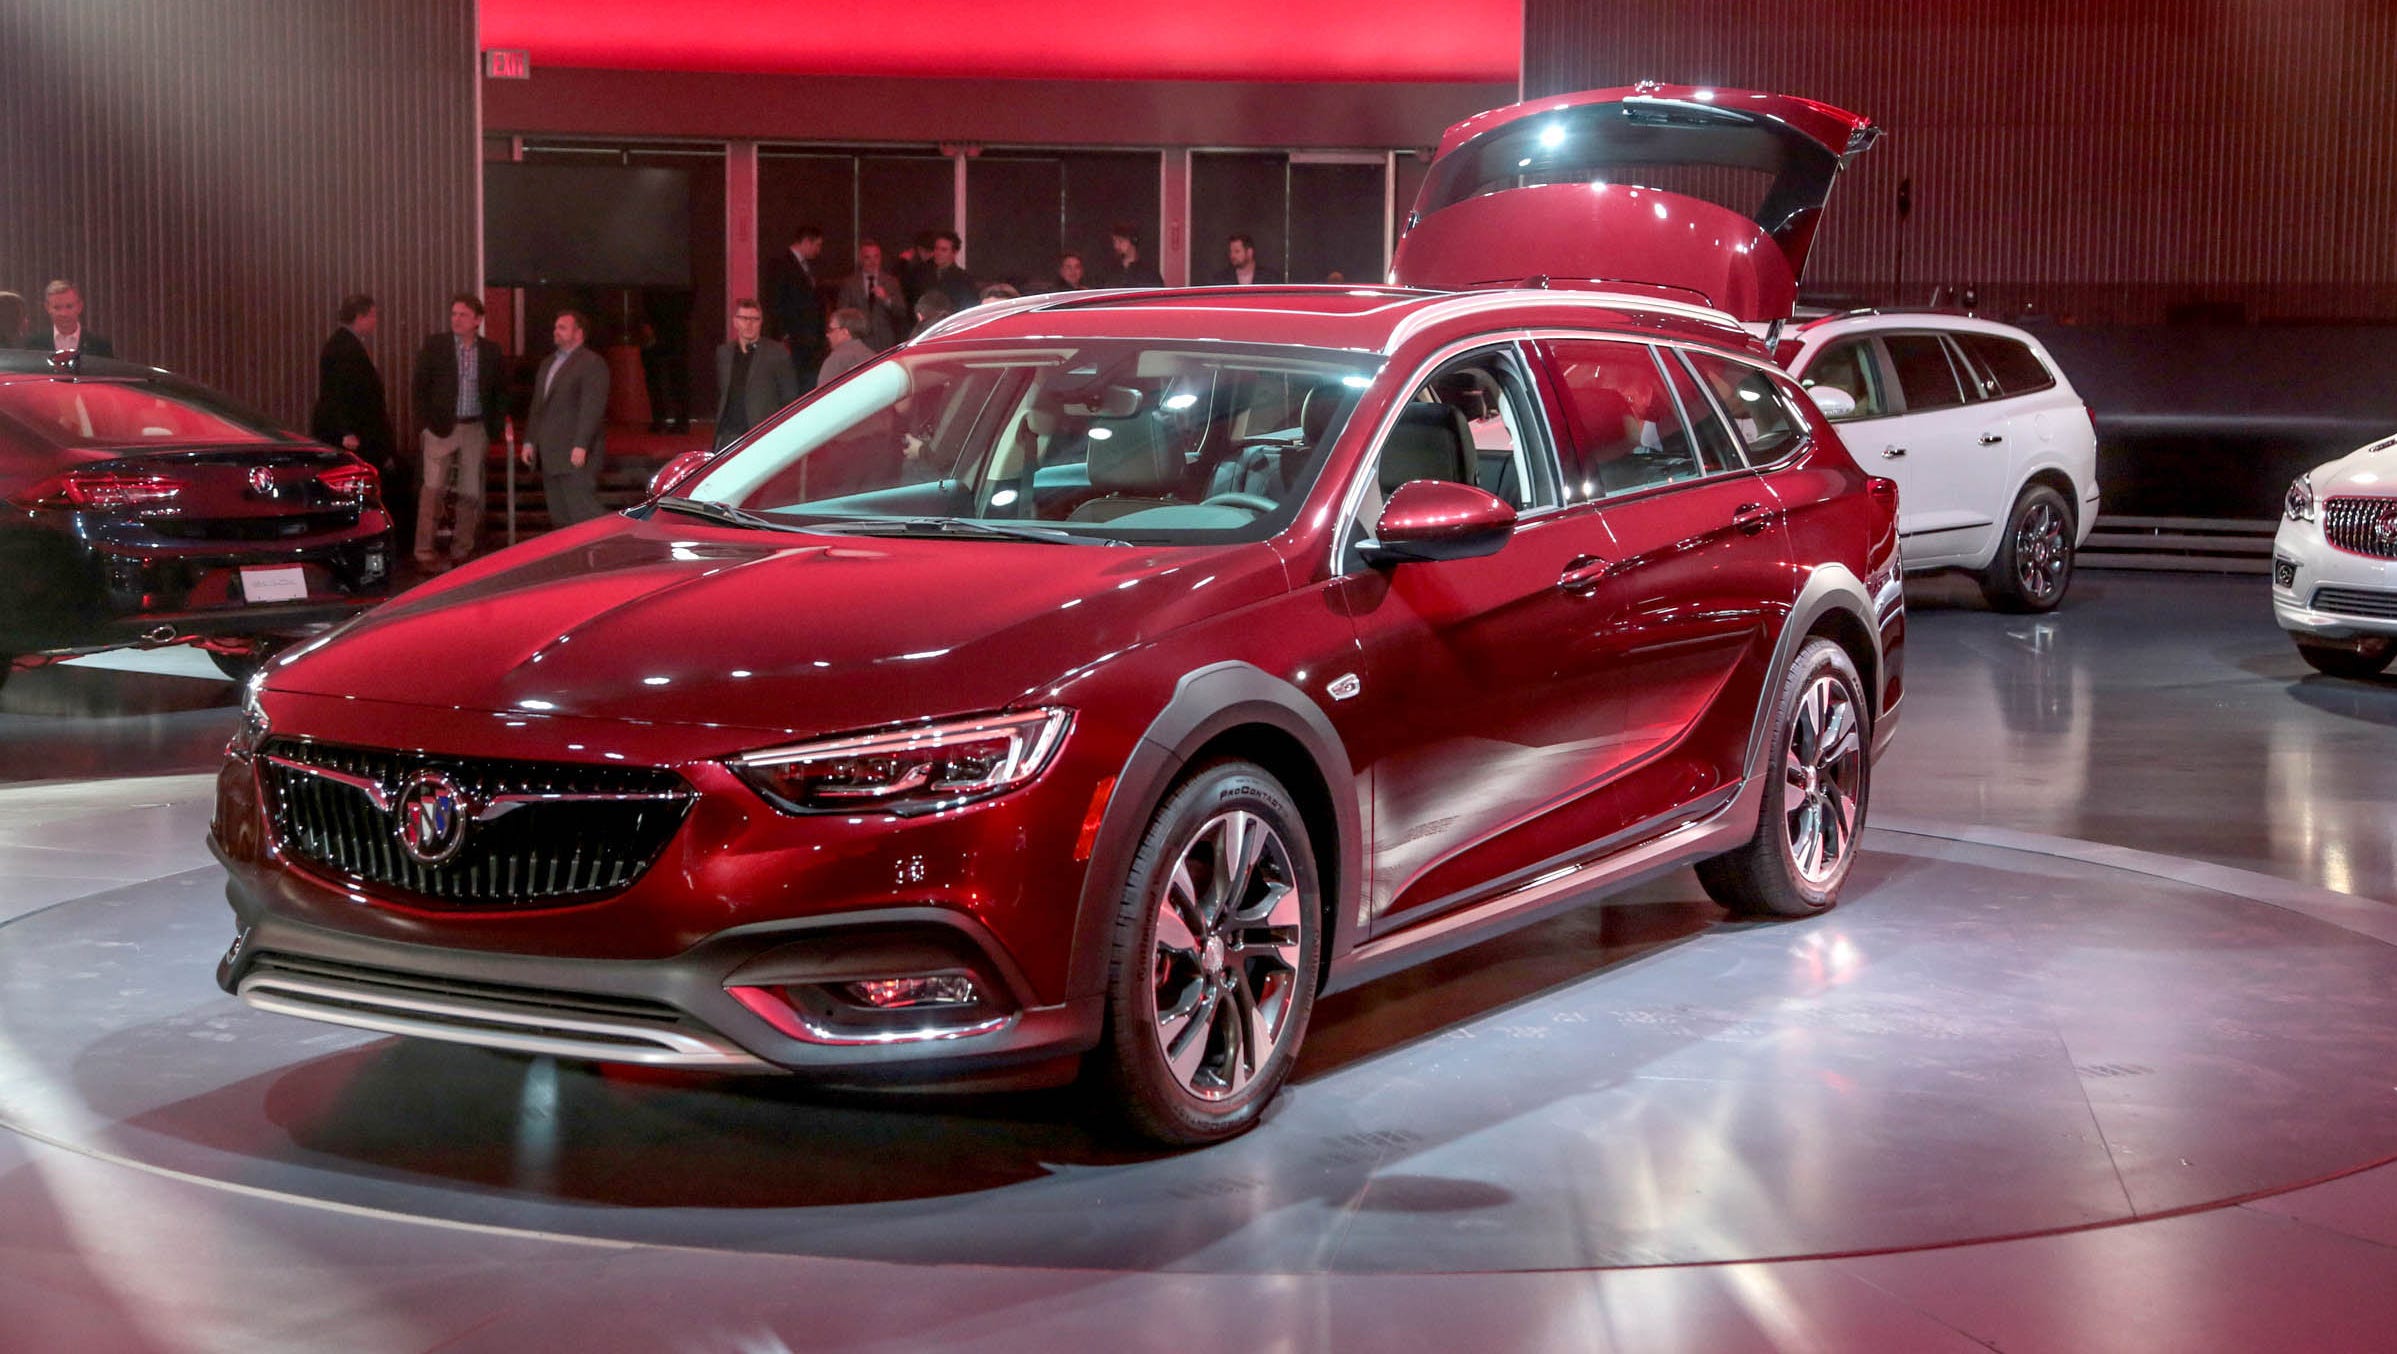 Review: 2018 Buick Regal TourX sport wagon delivers room, style value